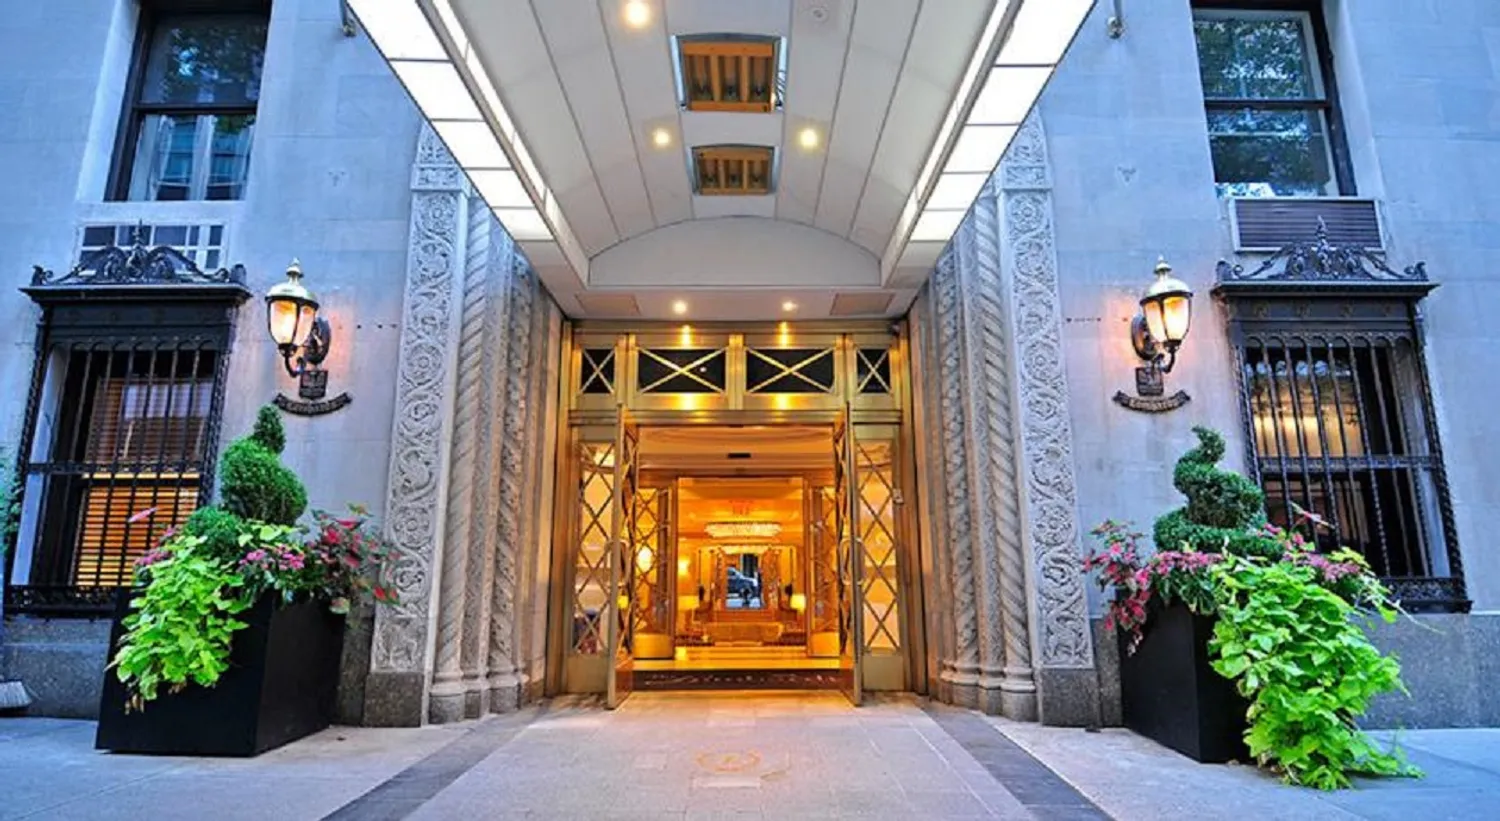 The Lombardy Hotel Entrance